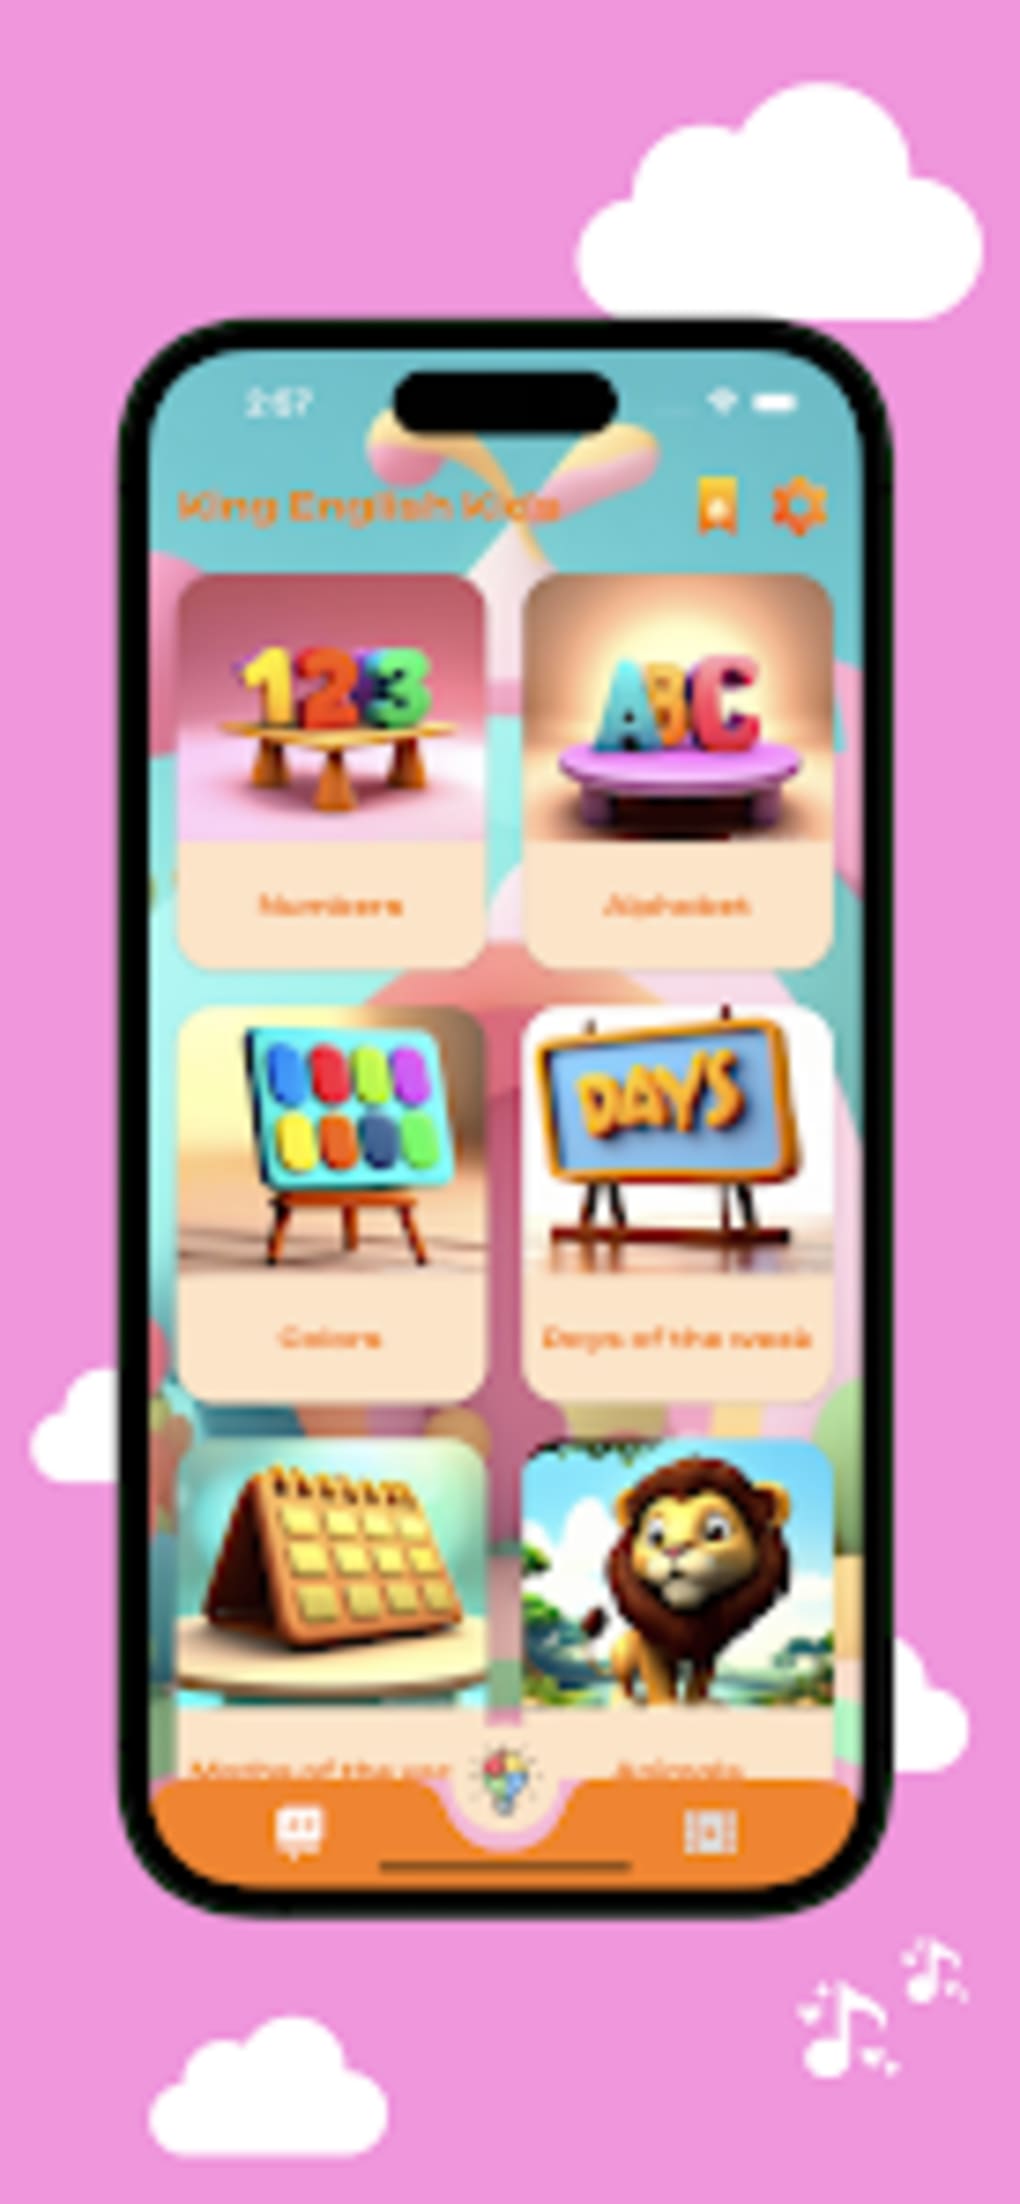 King English Kids for Android - Free App Download